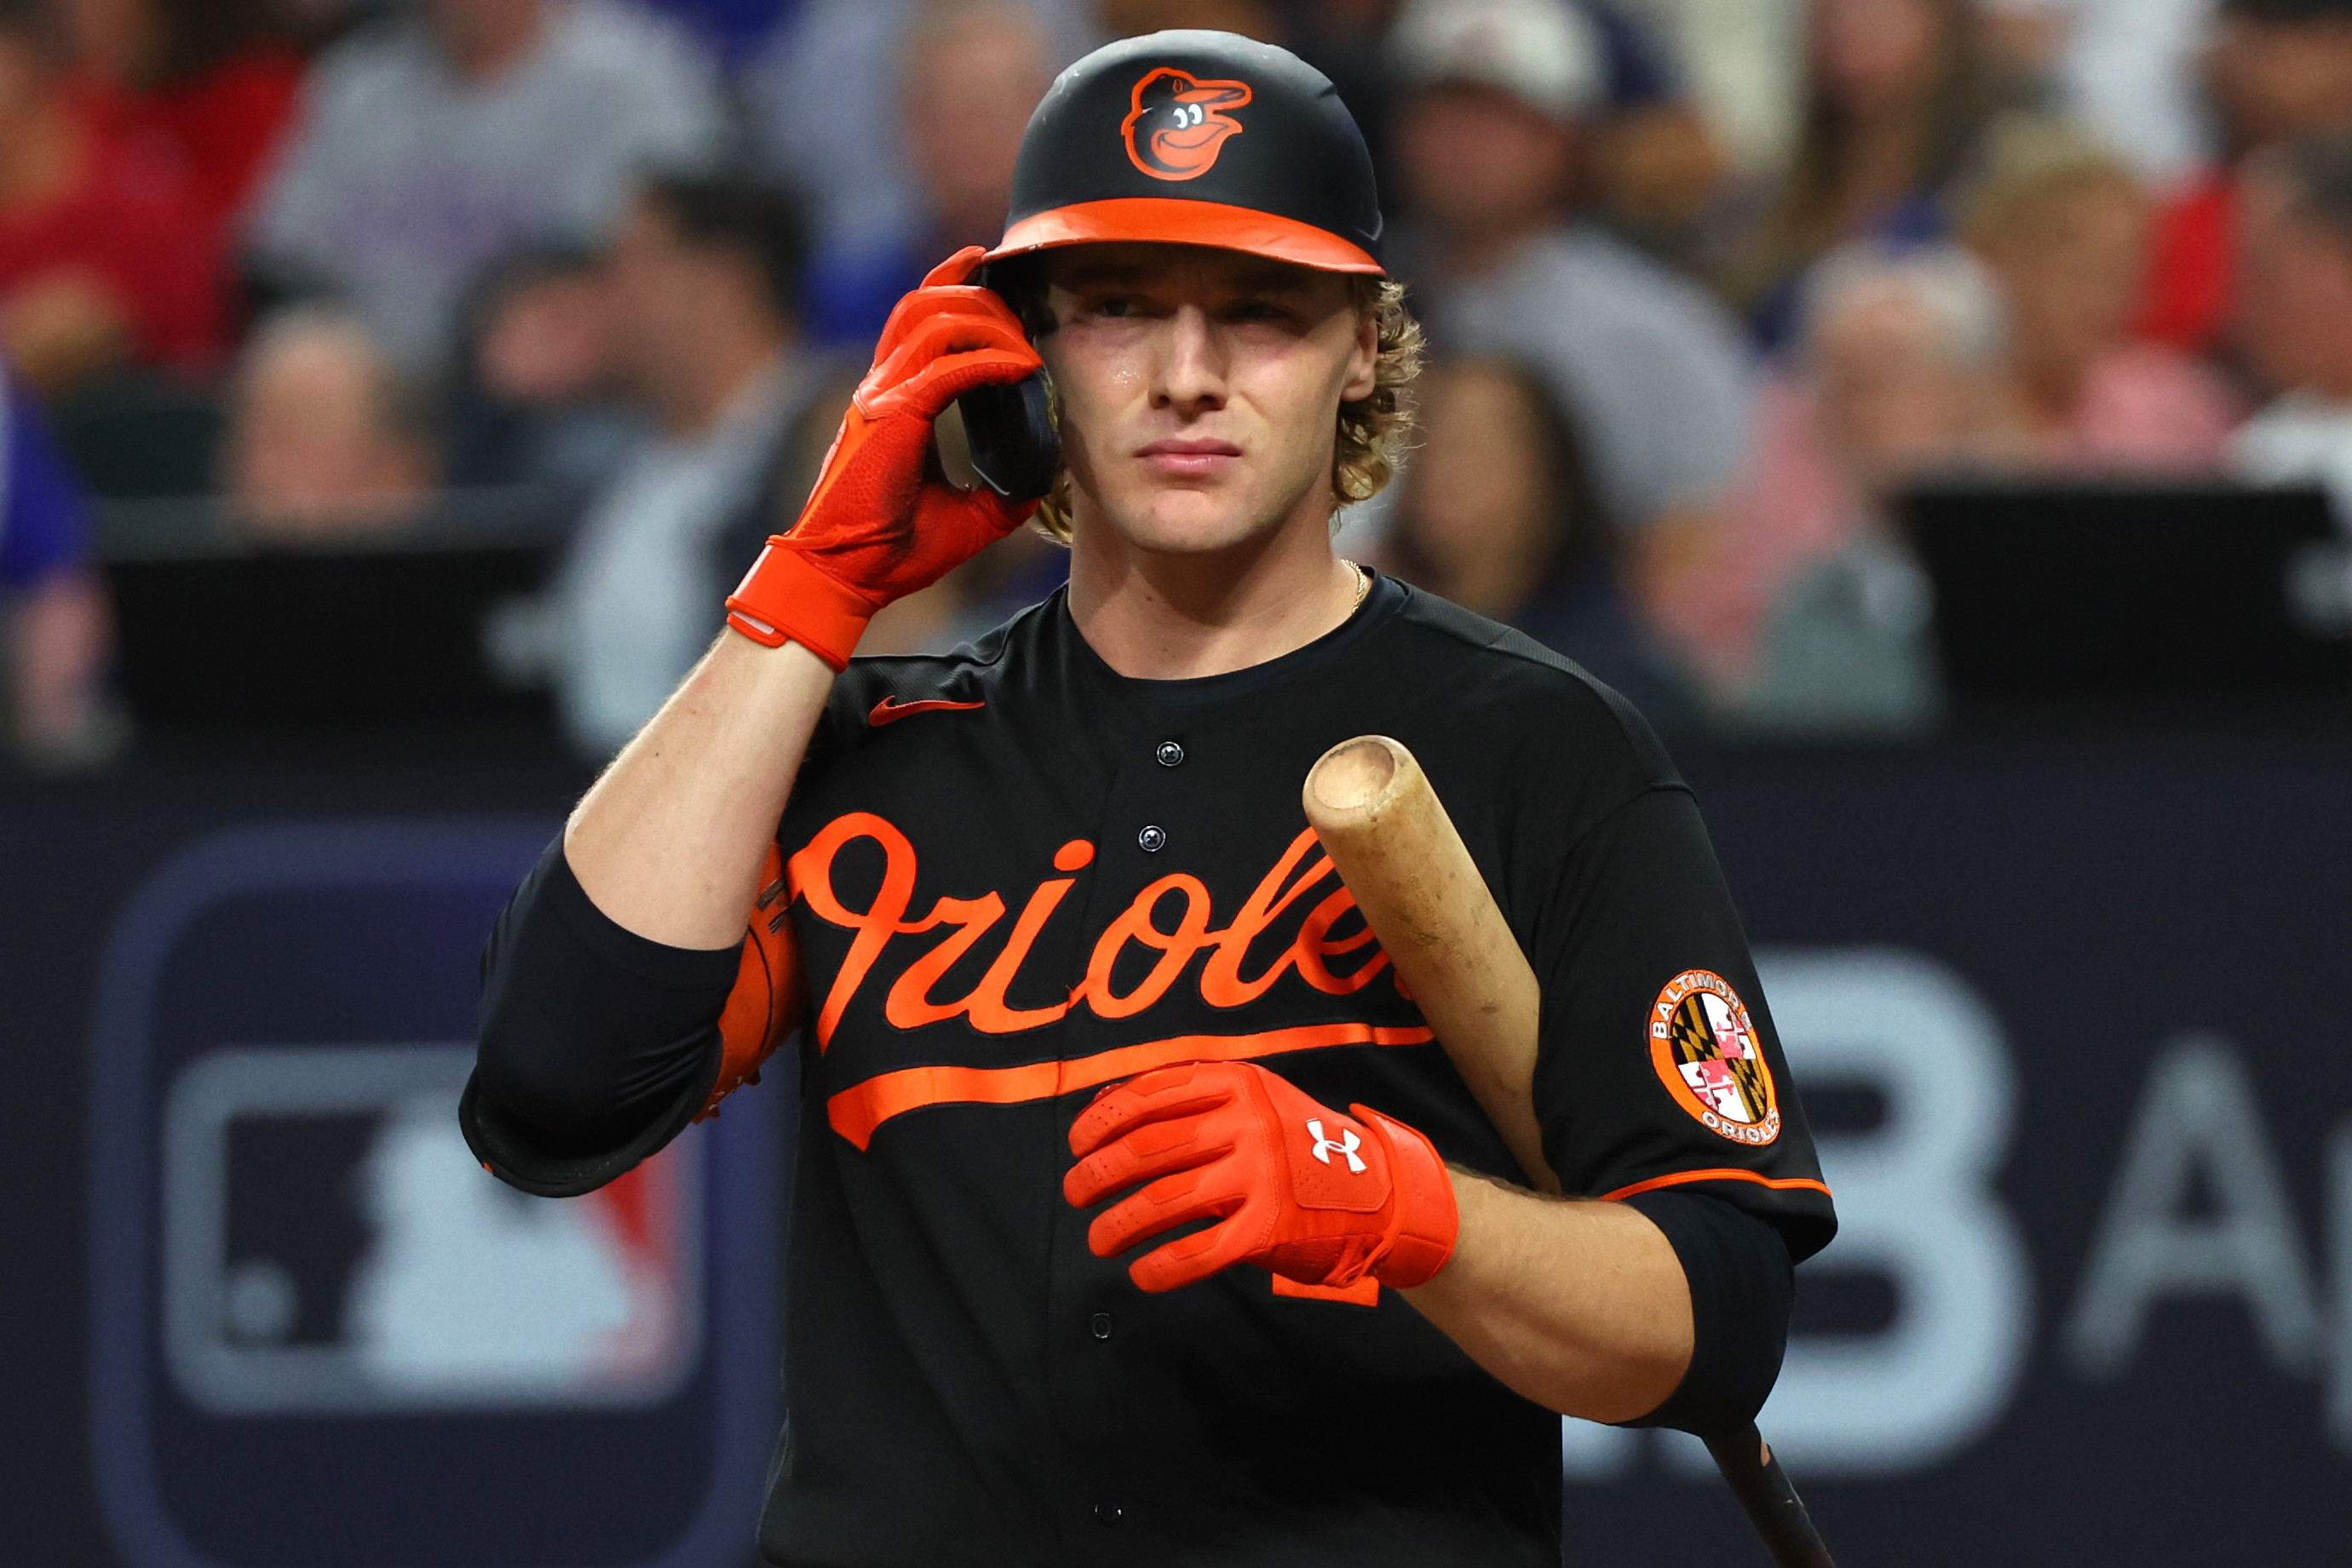 Adley Rutschman lives up to the hype for surprising Baltimore Orioles